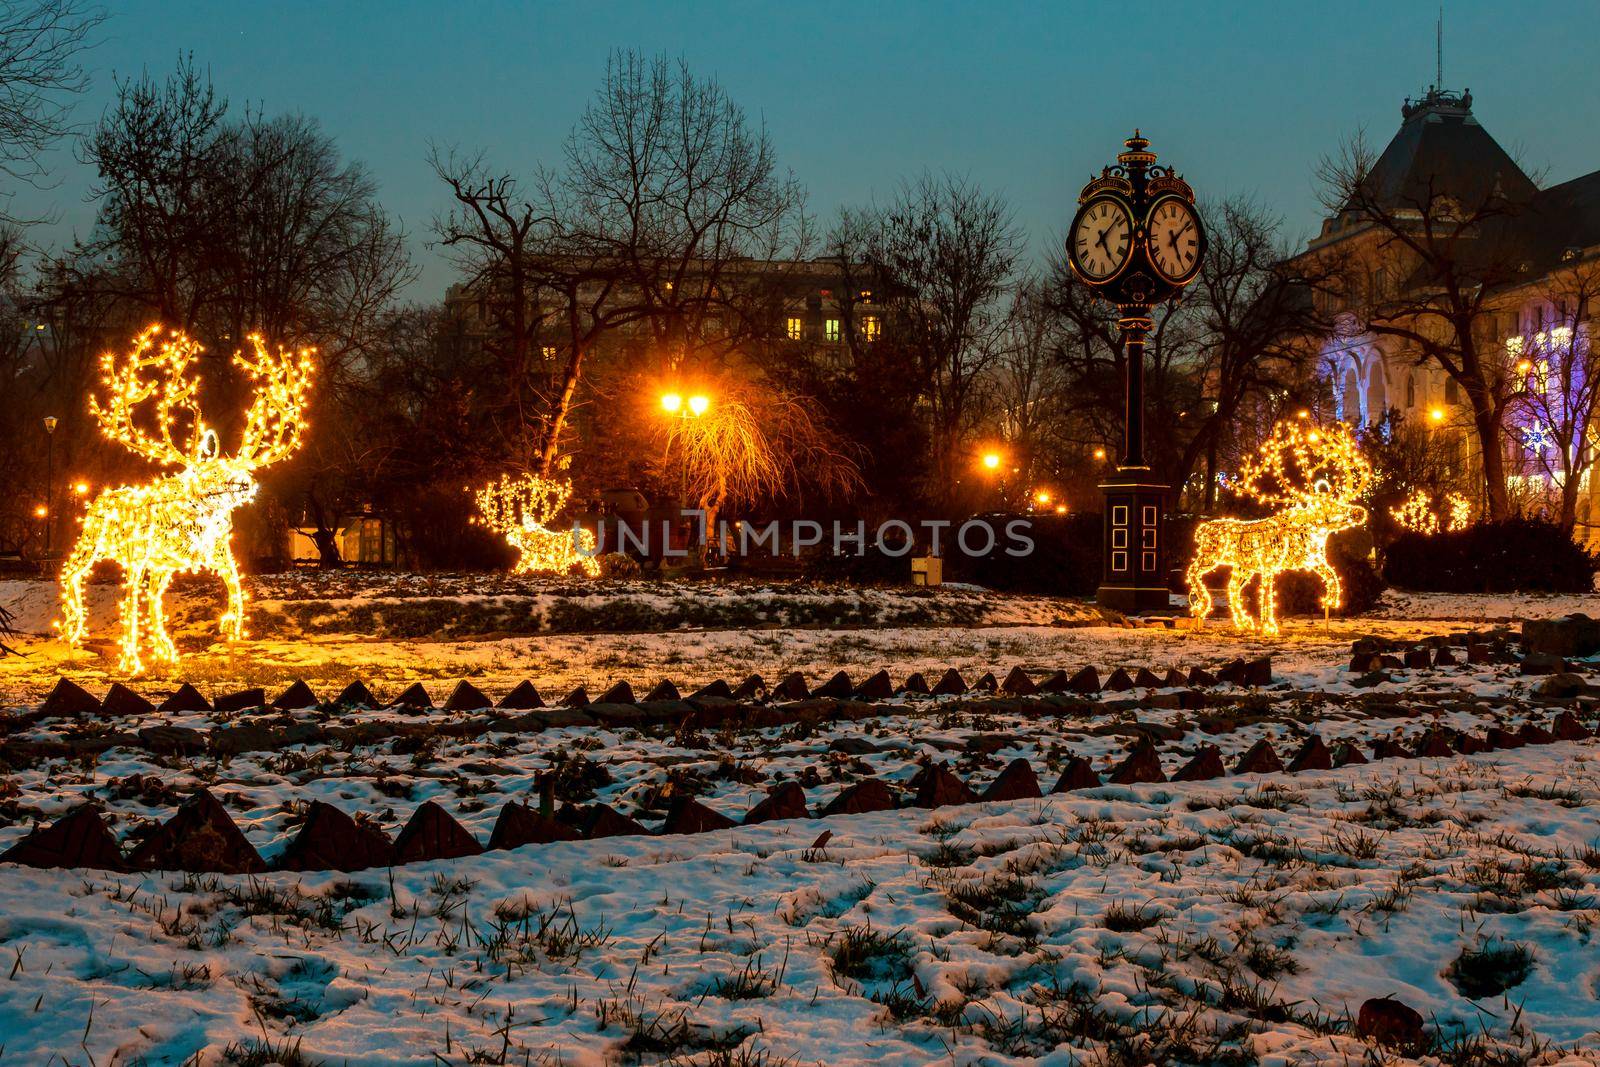 Christmas decorations in the gardens of Cismigiu park located in downtown Bucharest, Romania by vladispas